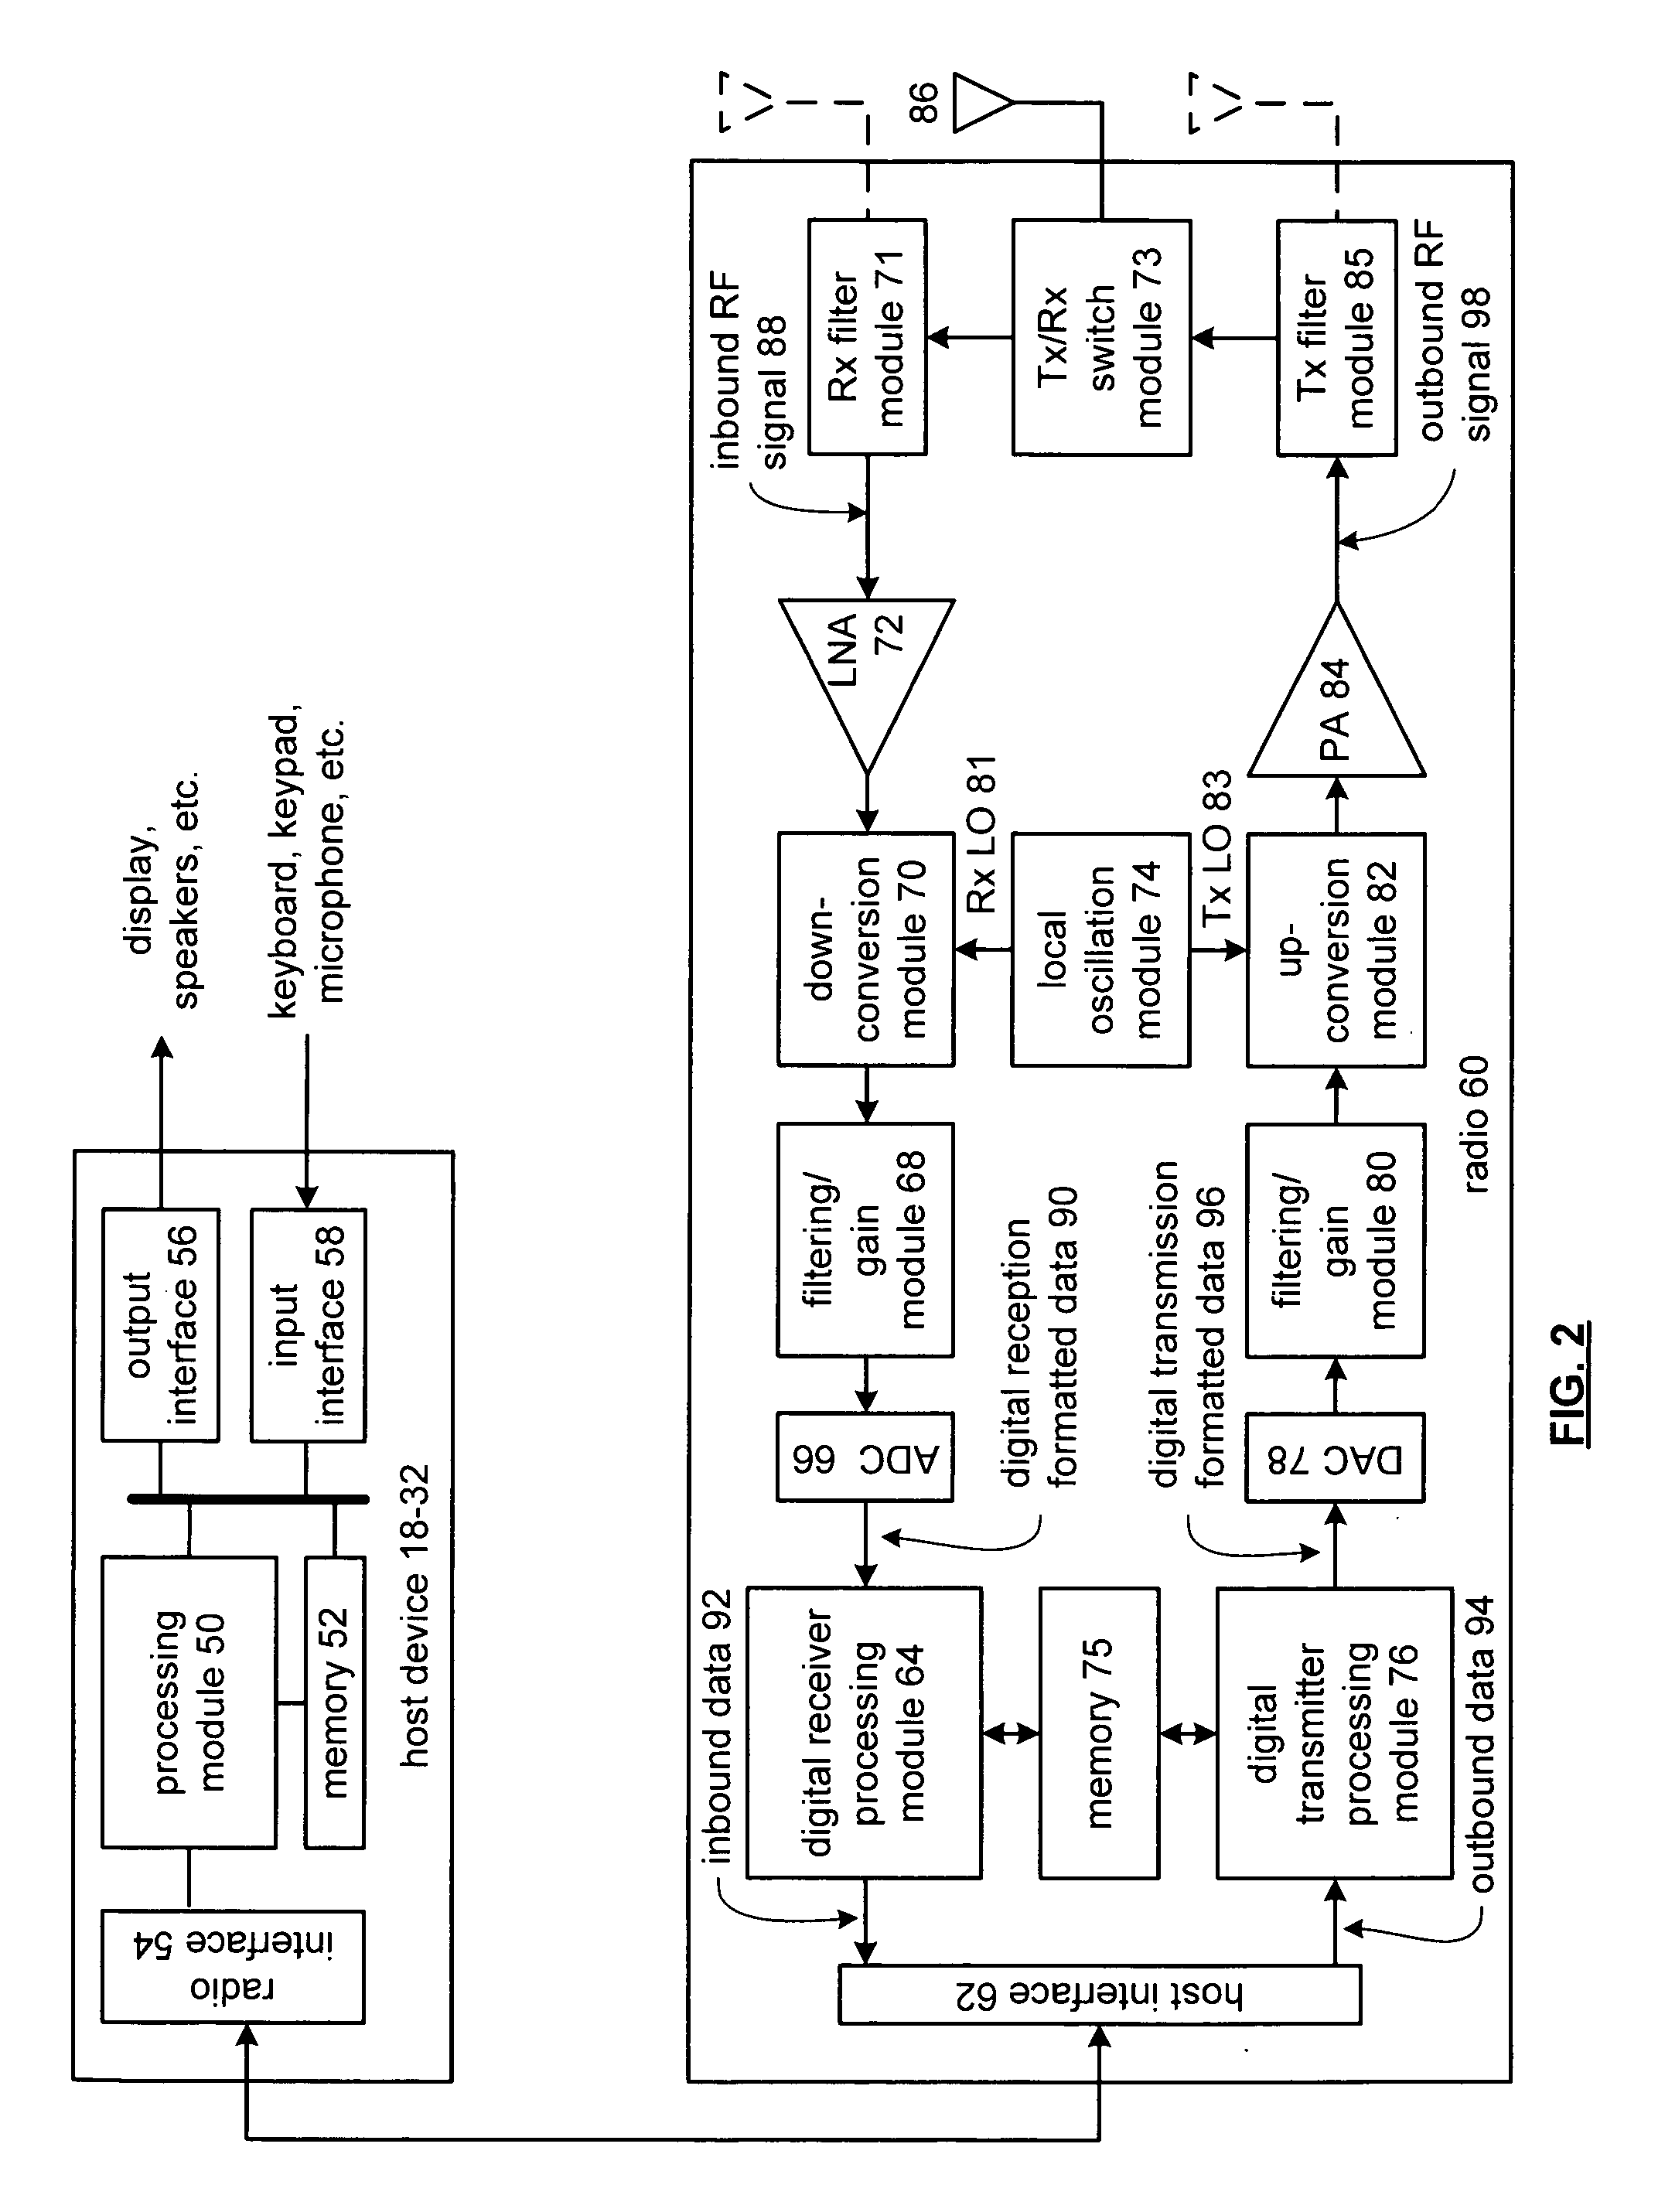 Configurable spectral mask for use in a high data throughput wireless communication